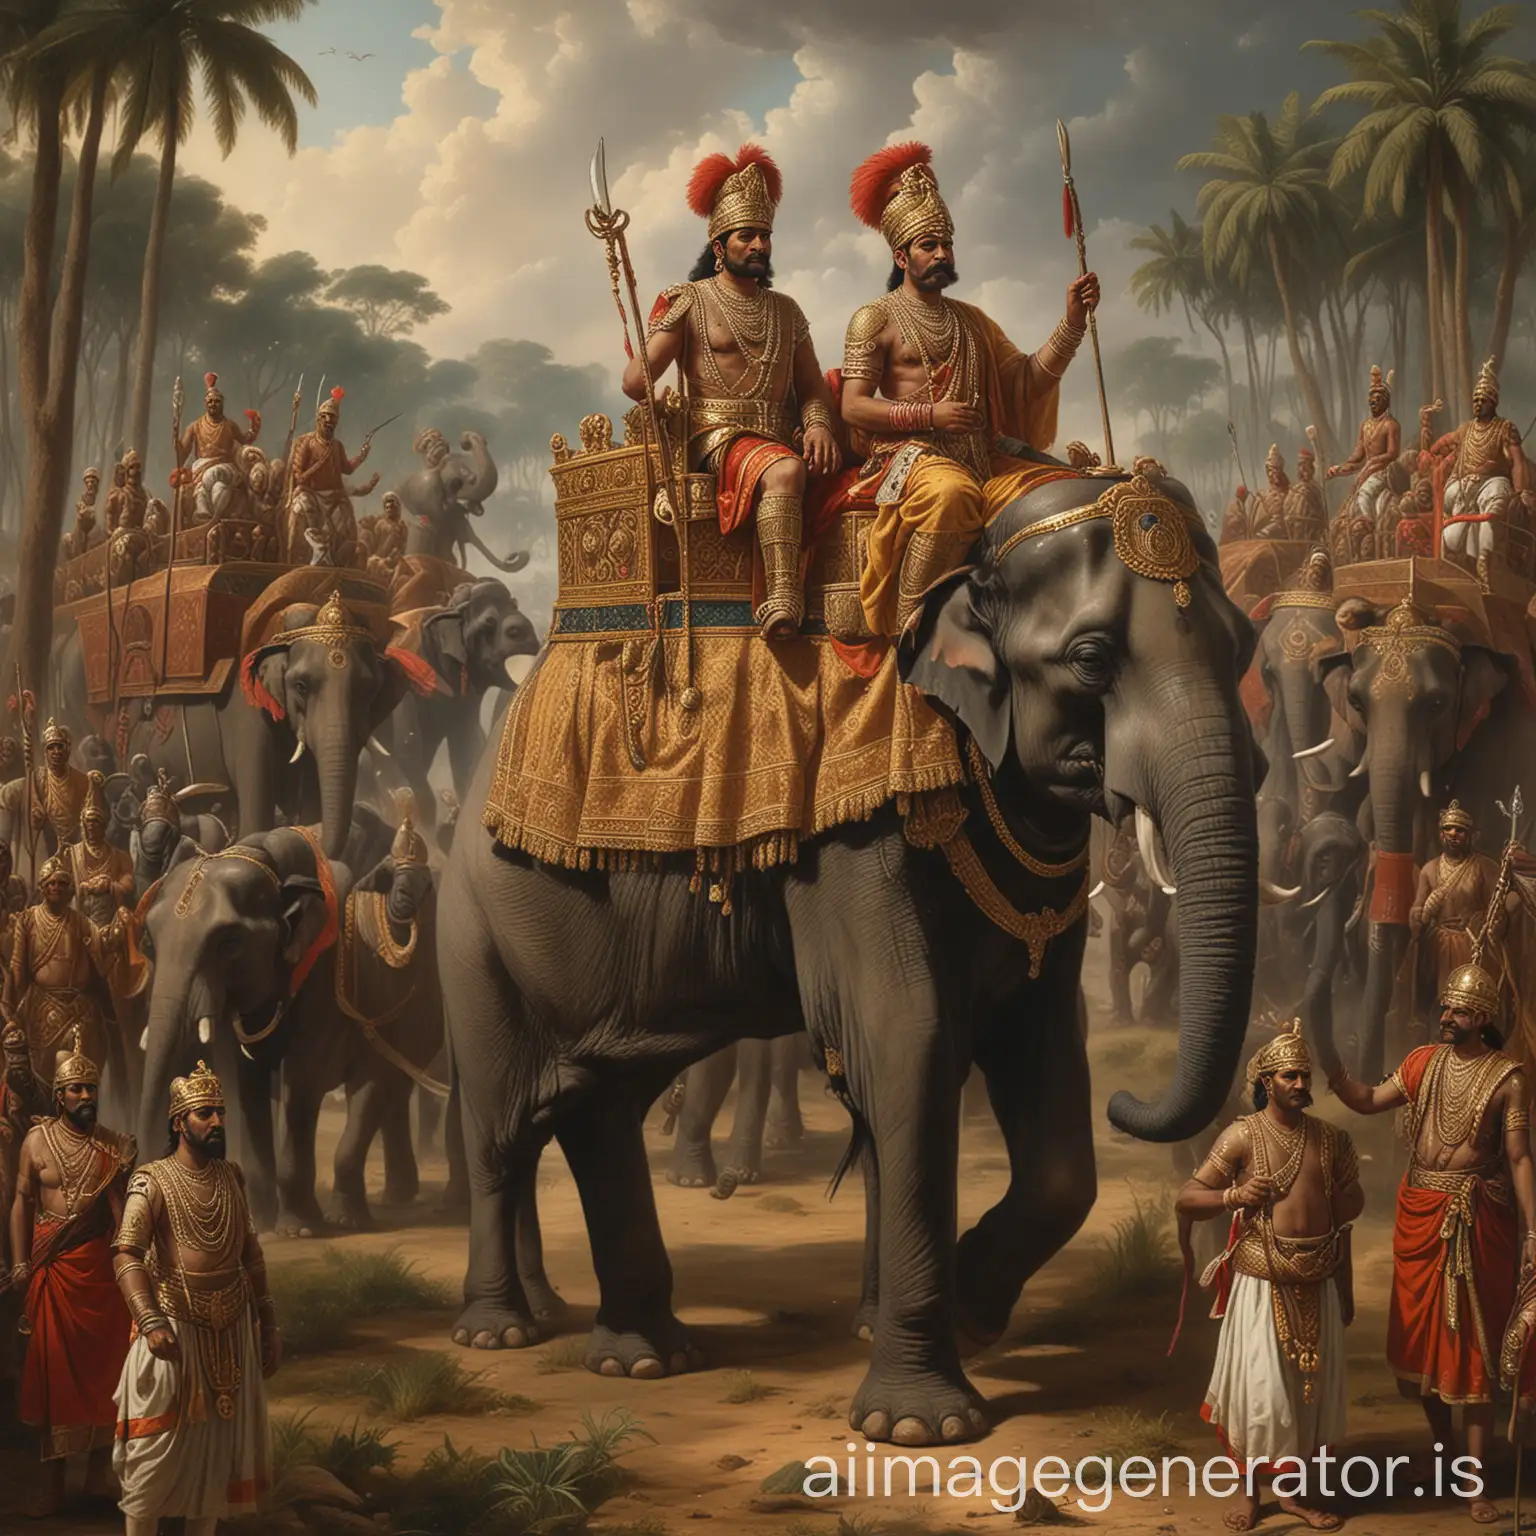 An Indian king and his army with elephants, horses, chariots